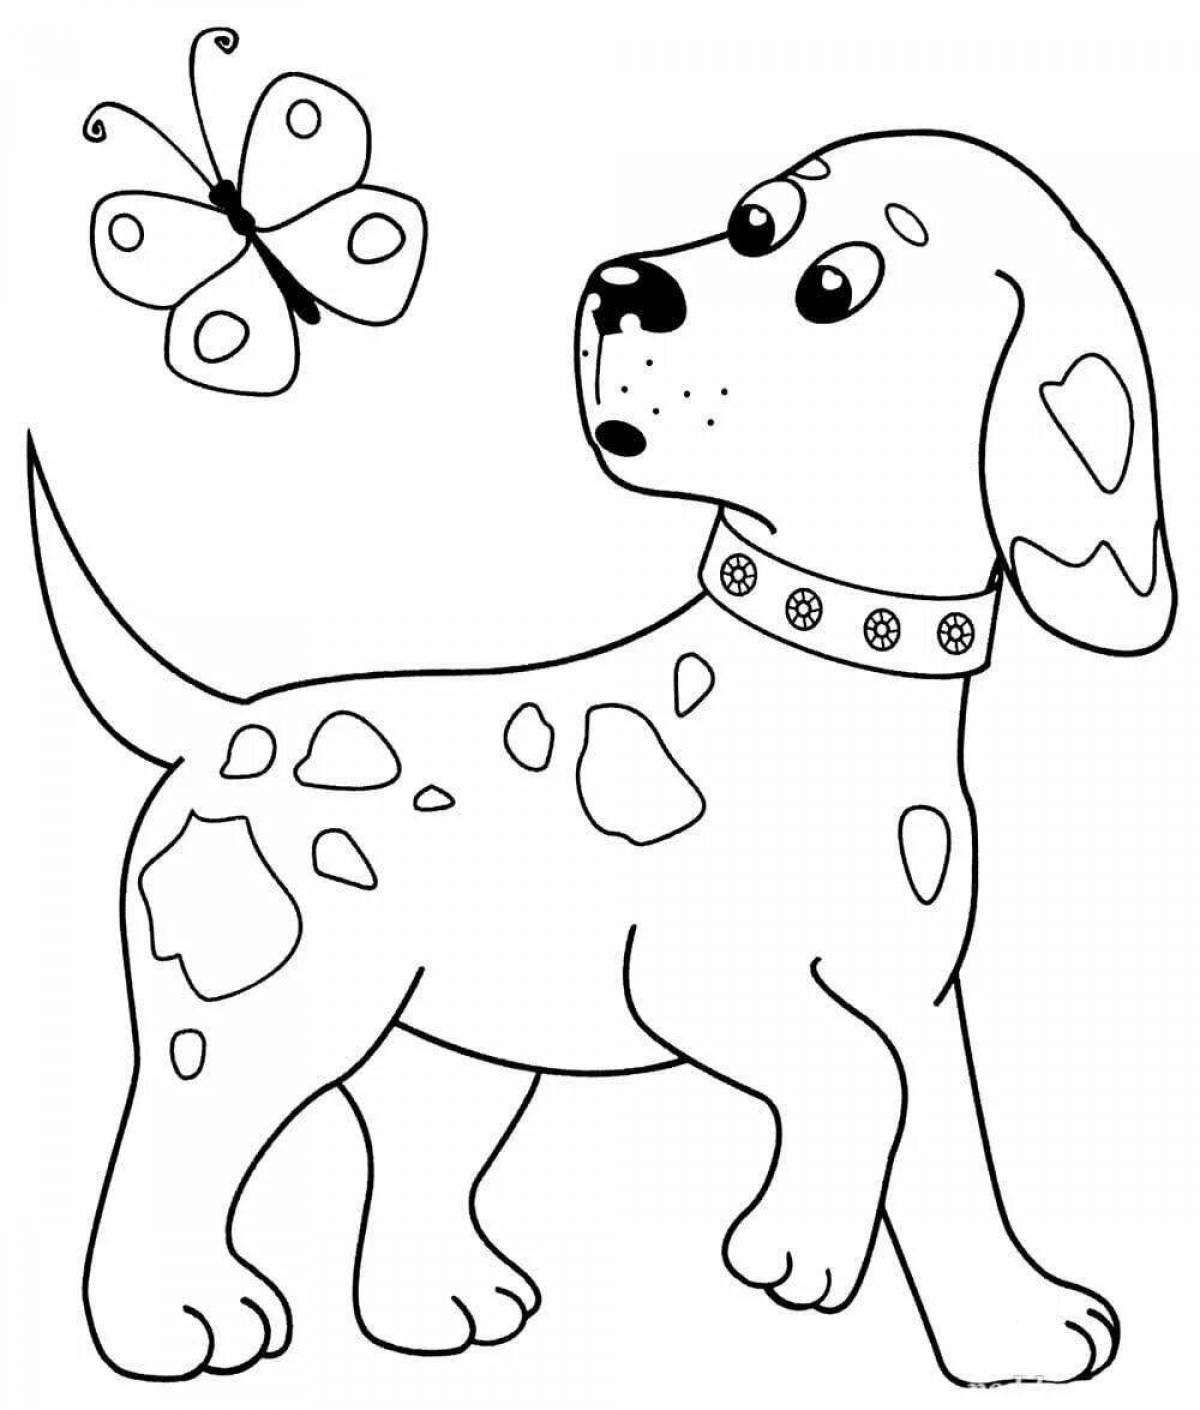 Puppy drawing #4